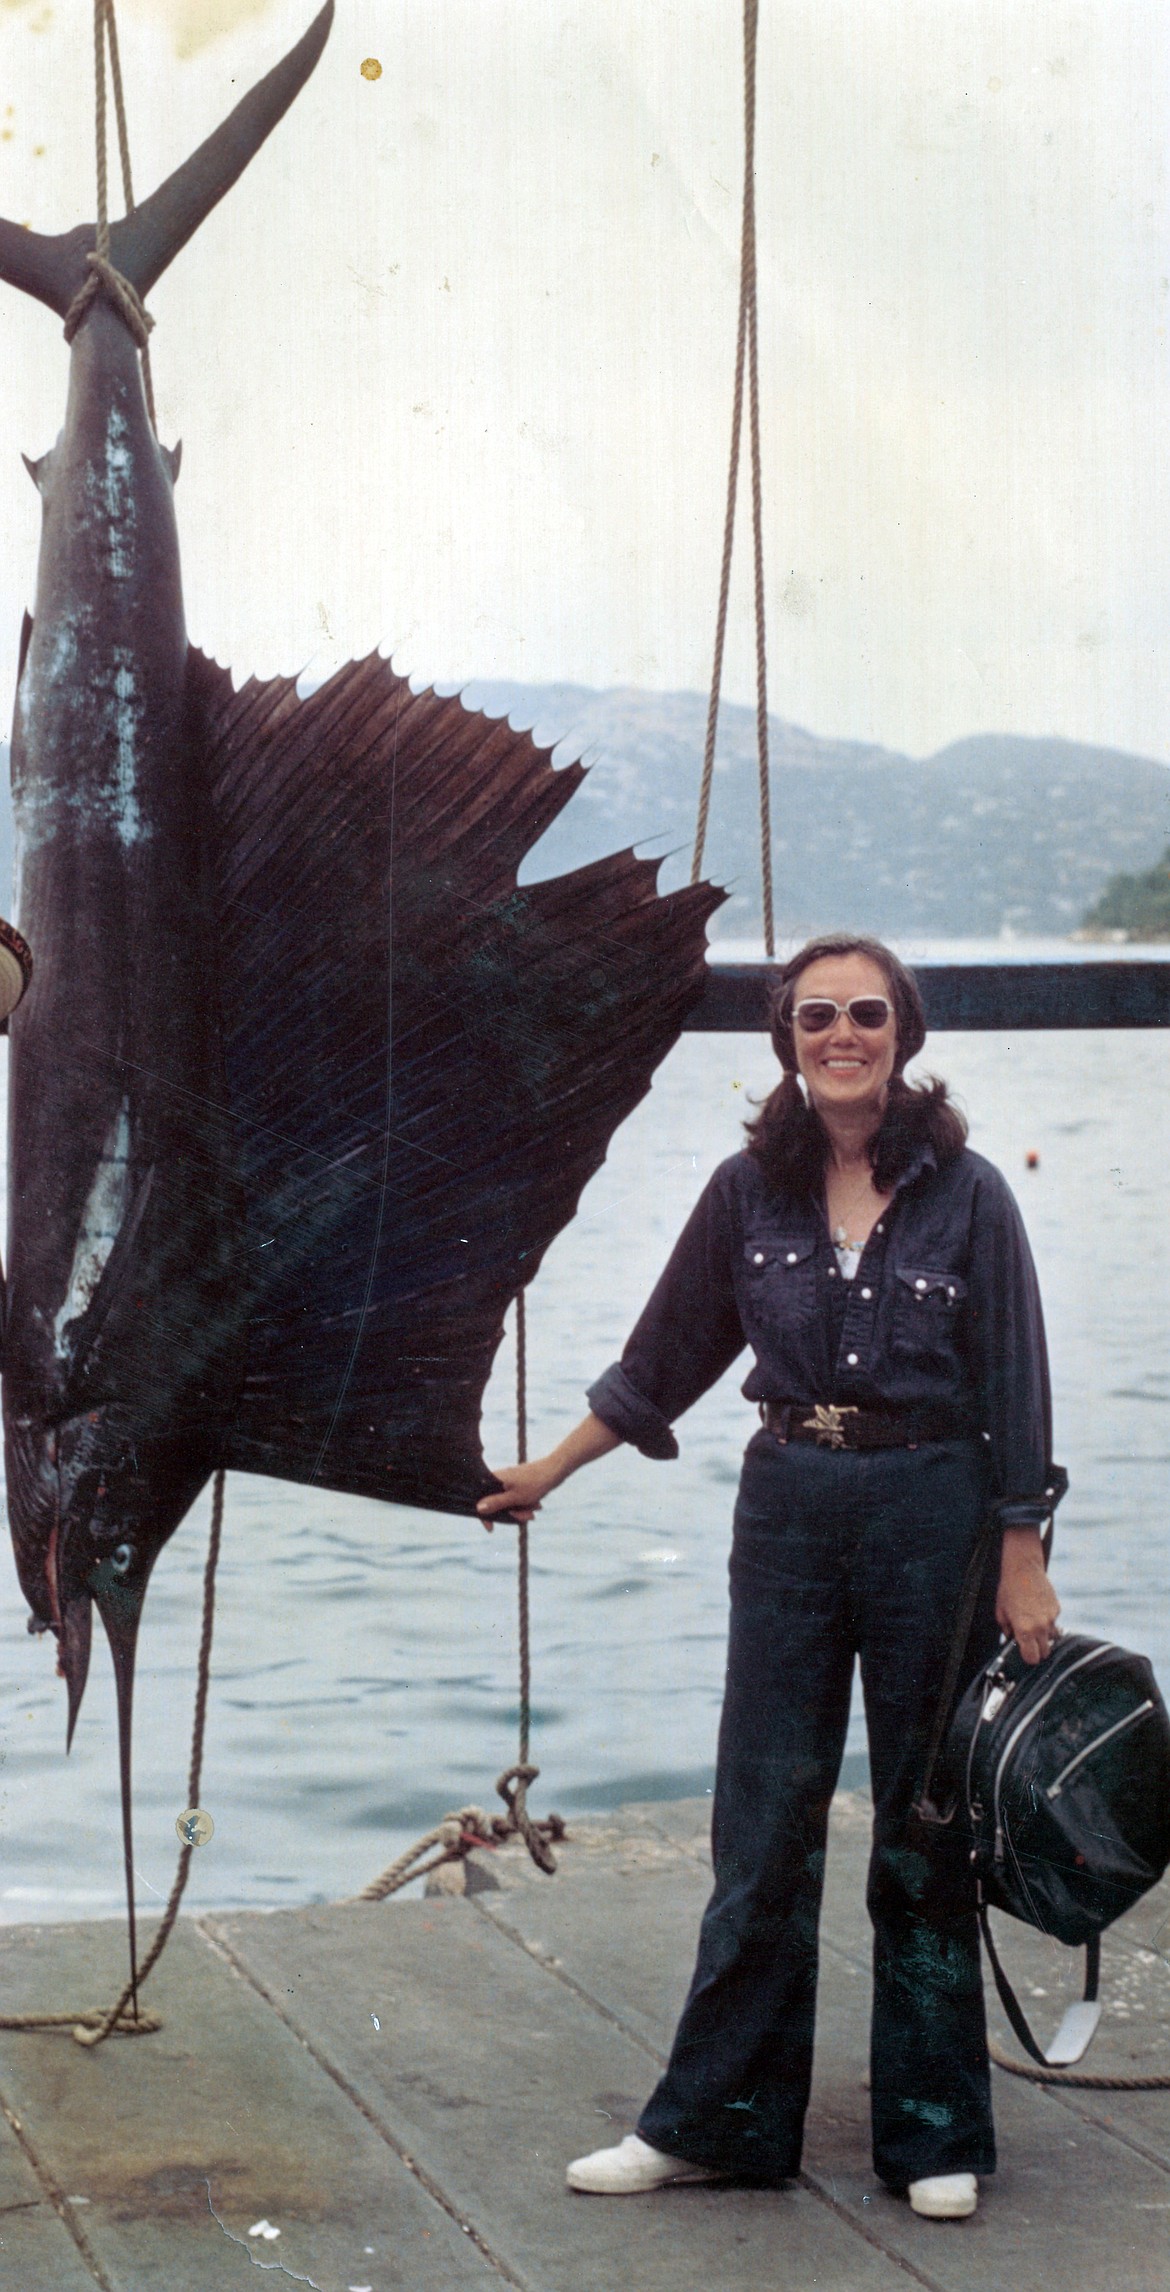 Valle Novak is pictured with a 10-foot sailfish she caught in Acapulco in 1974. "Did it all by myself," she wrote on the back of the photograph.